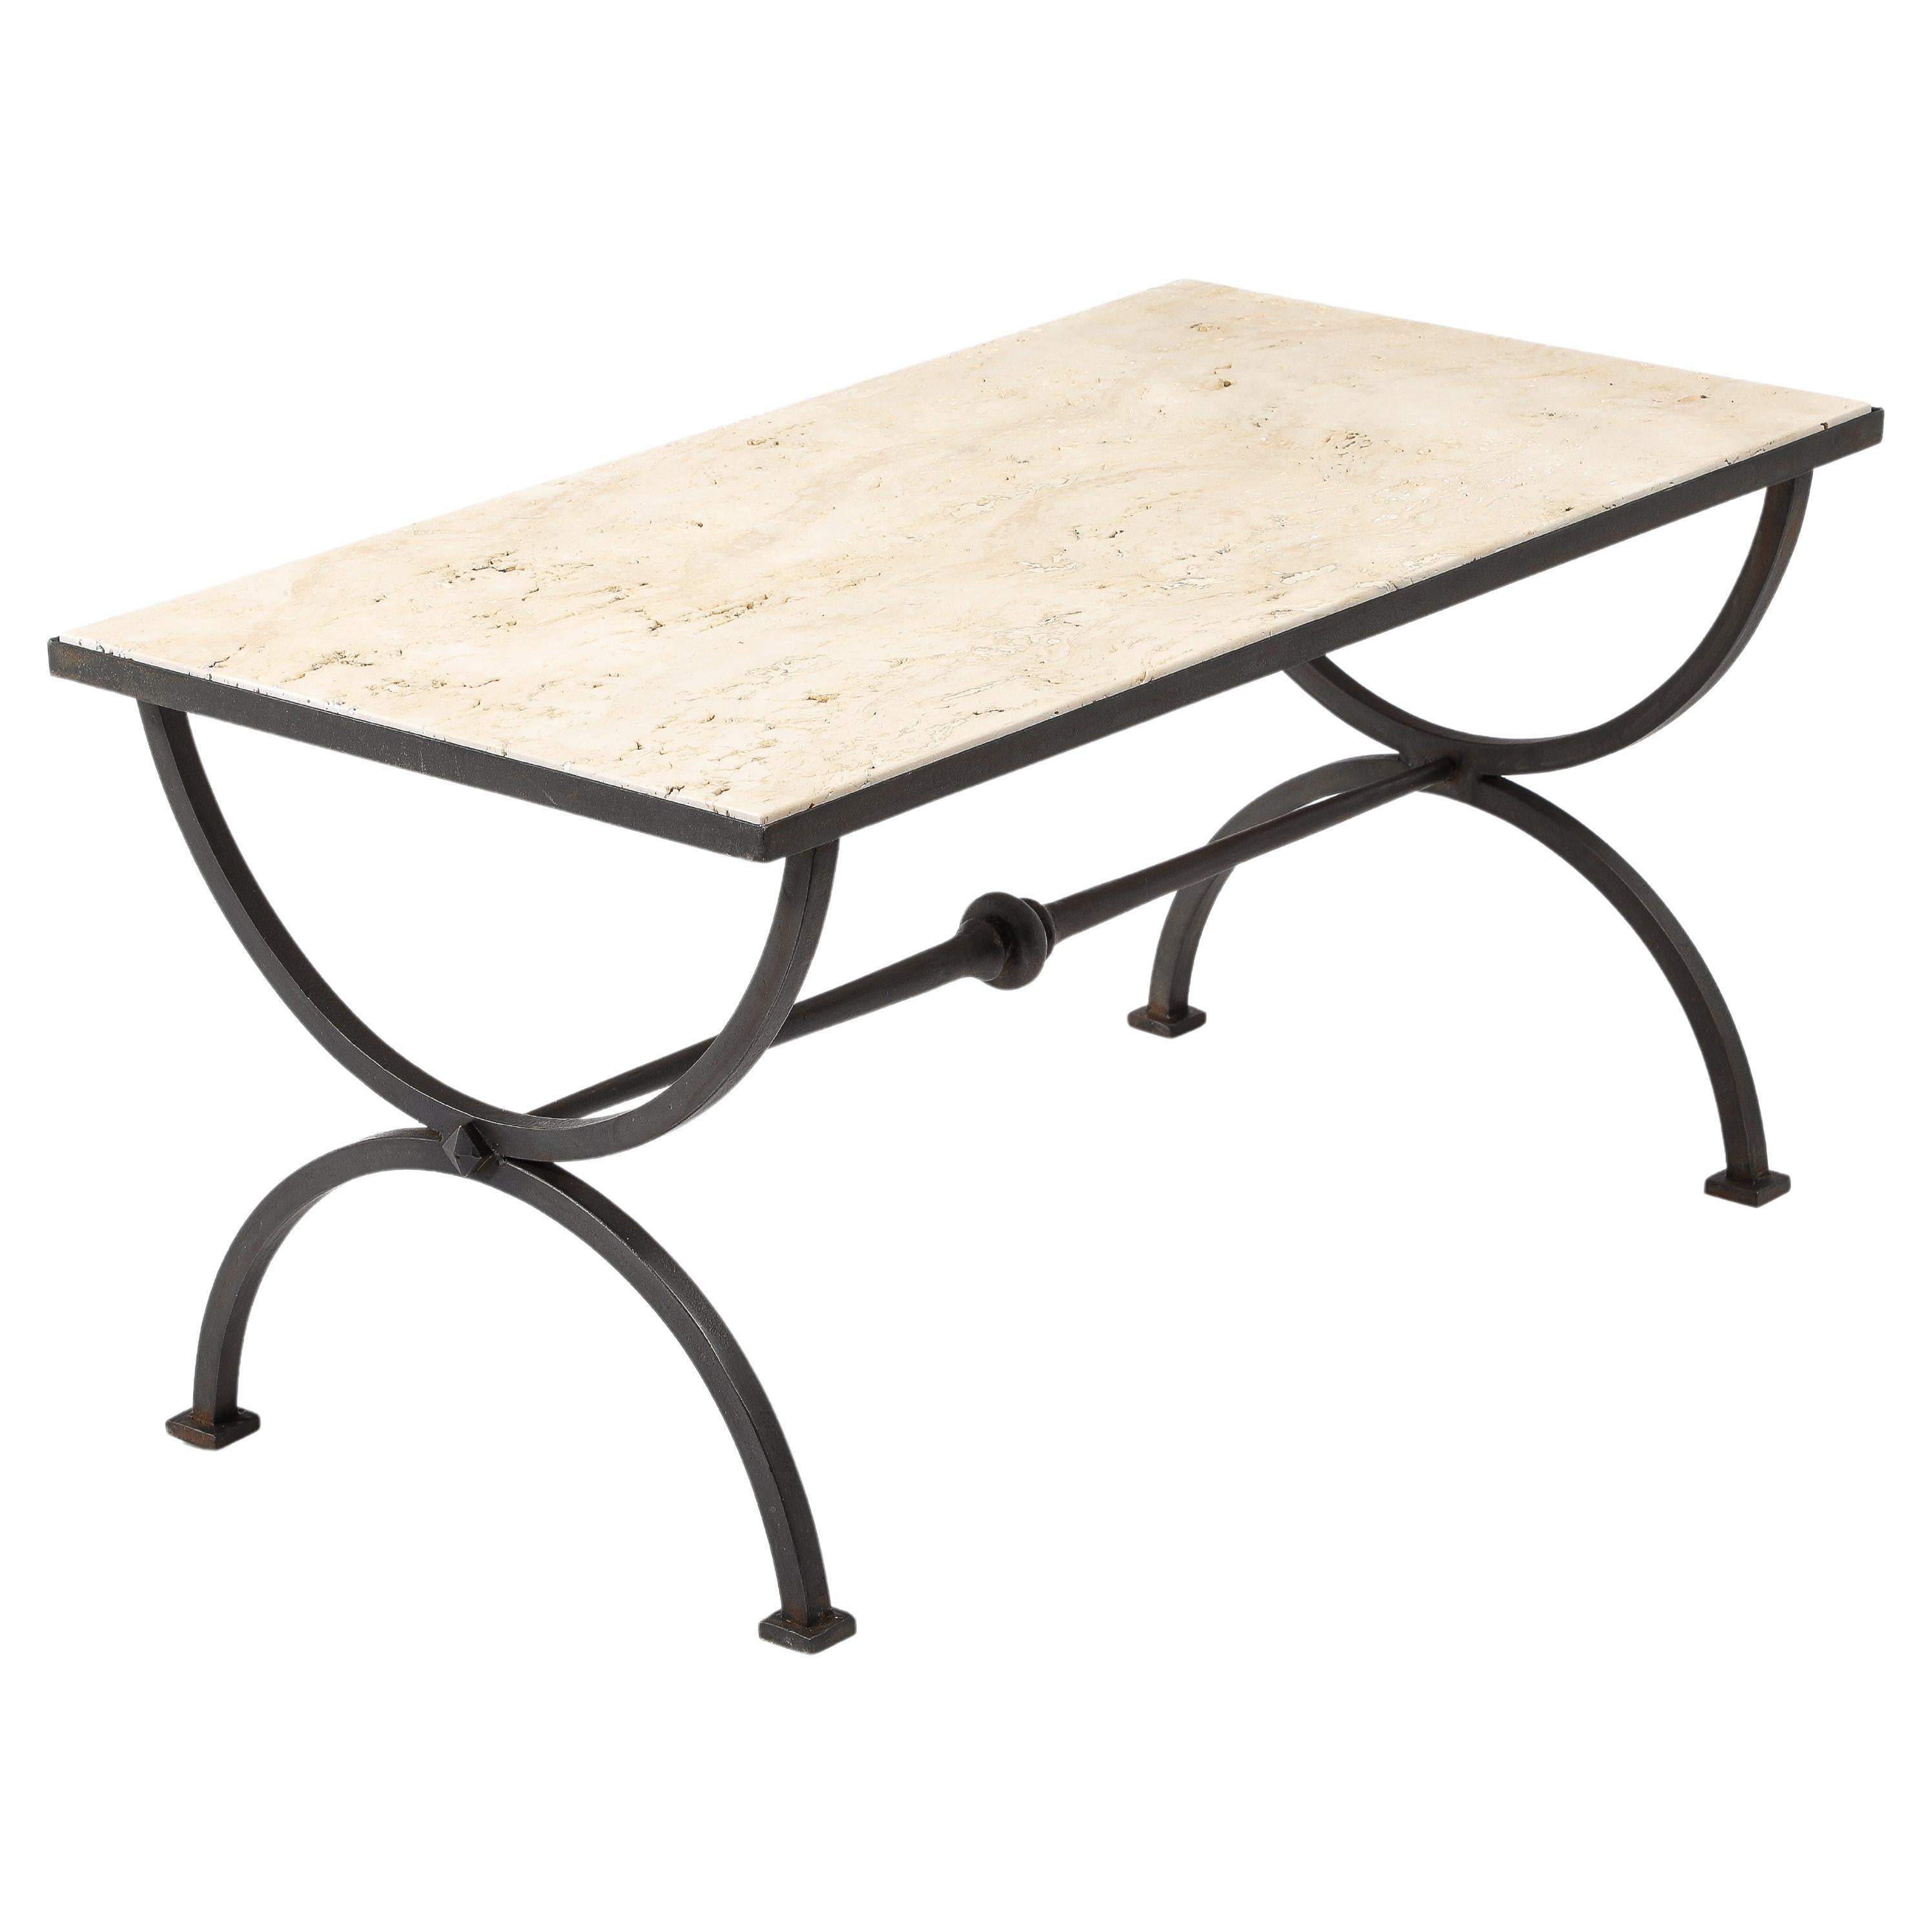 Travertin Marble & Wrought Iron Coffee Table, France 1940's